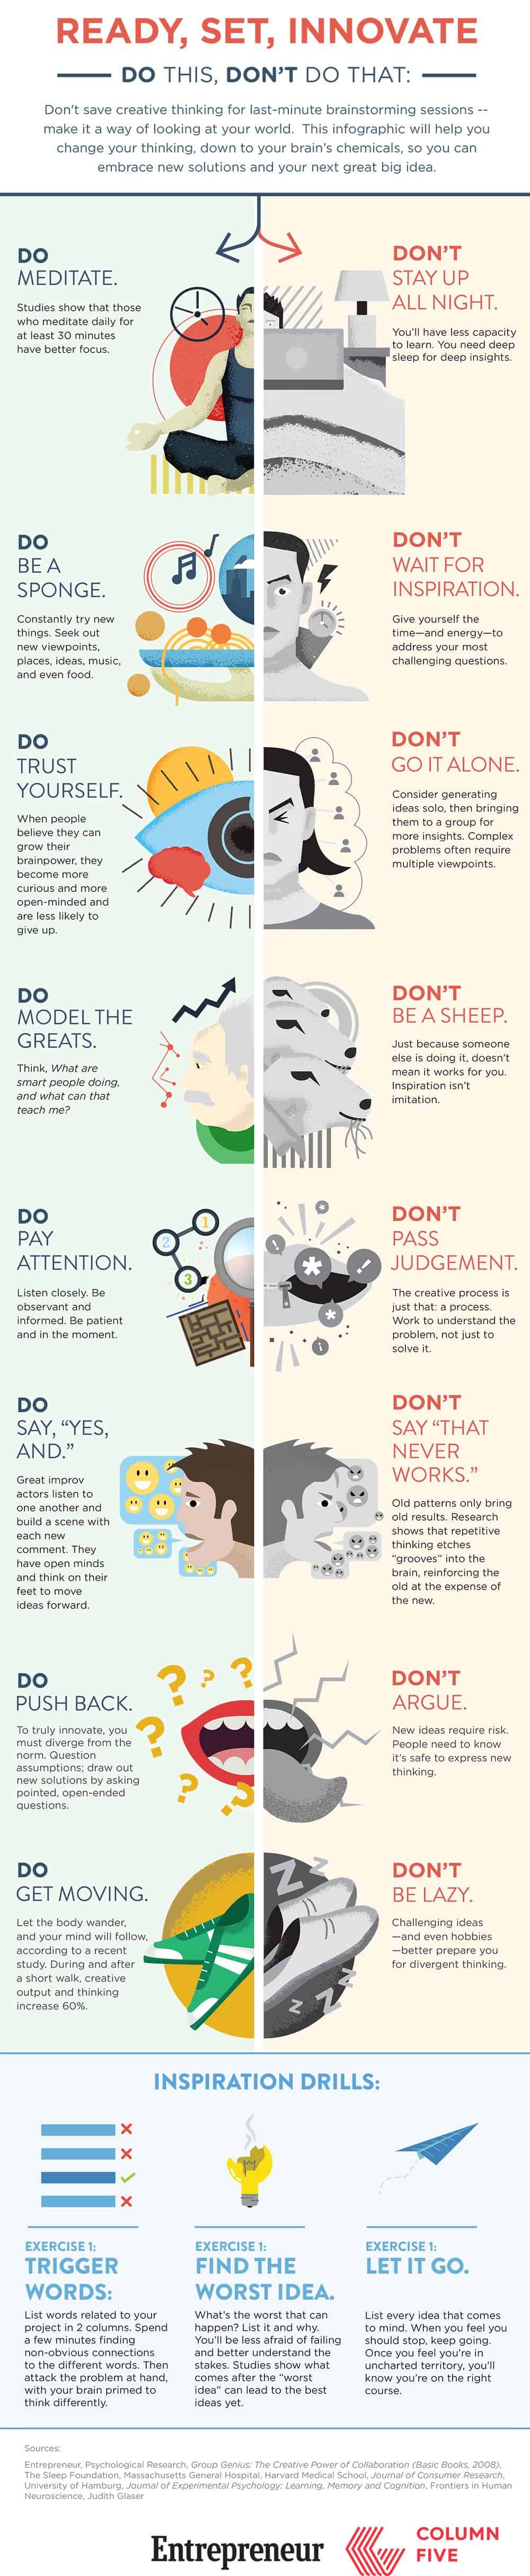 Infogrpahic from Entrepreneur about dos and donts for your creativity